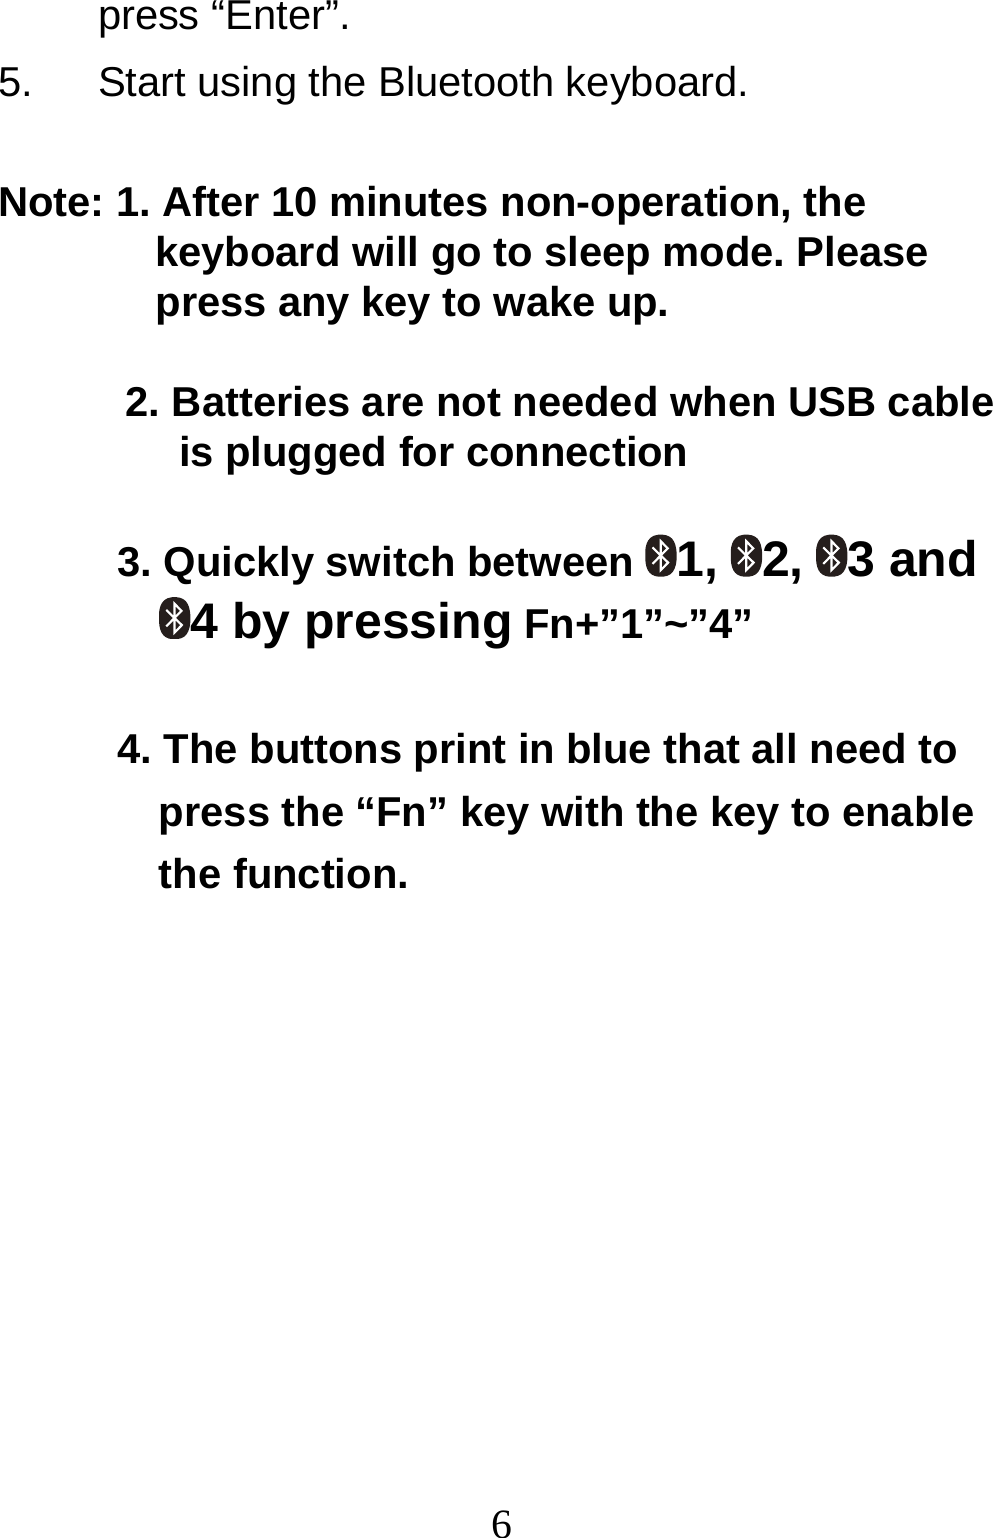  6press “Enter”. 5.  Start using the Bluetooth keyboard.  Note: 1. After 10 minutes non-operation, the  keyboard will go to sleep mode. Please  press any key to wake up.   2. Batteries are not needed when USB cable  is plugged for connection   3. Quickly switch between  1, 2, 3 and 4 by pressing Fn+”1”~”4”  4. The buttons print in blue that all need to press the “Fn” key with the key to enable the function.         